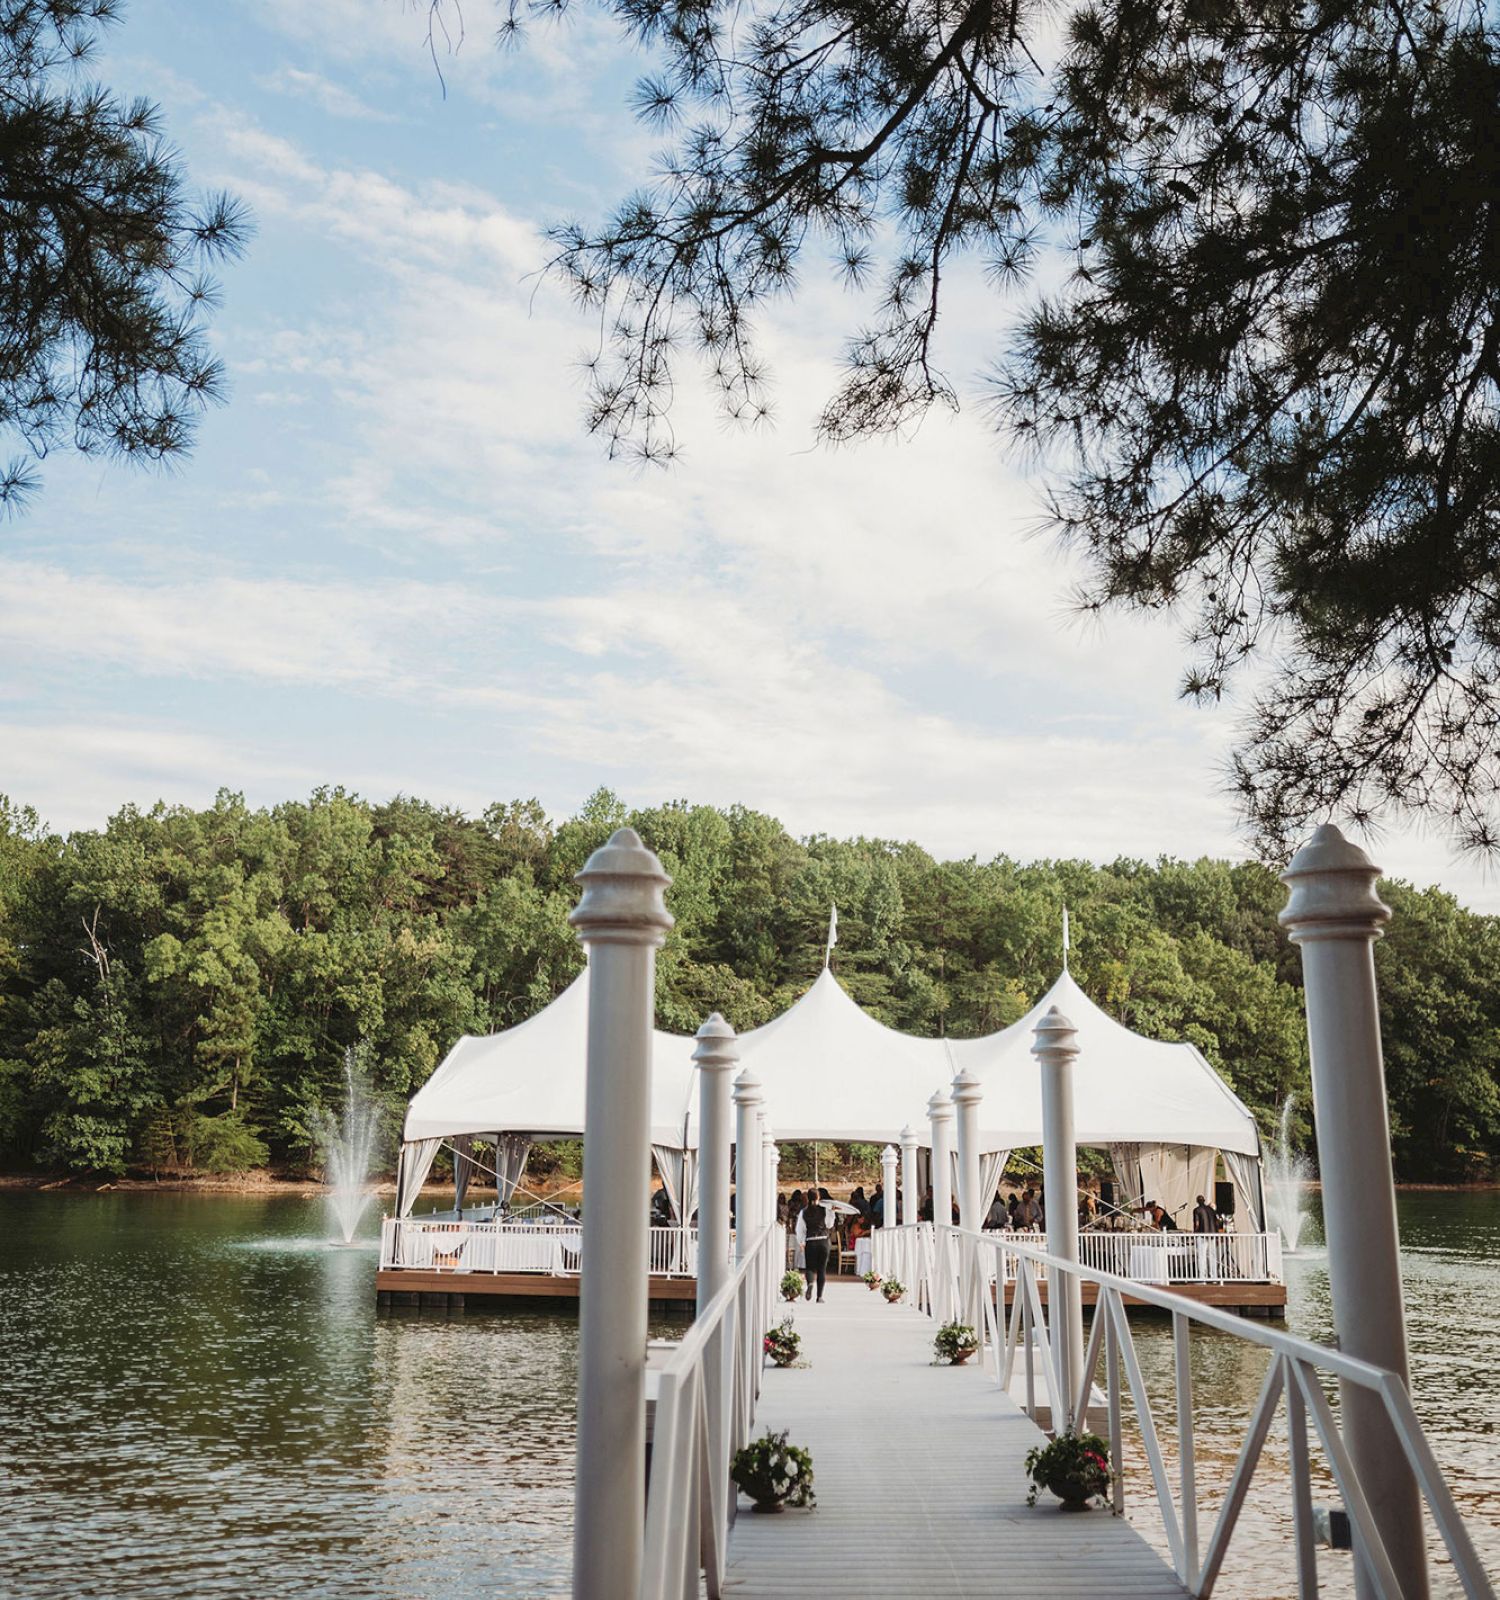 A wooden dock leads to a white tent setup on water, surrounded by trees under a clear sky, with some potted plants along the walkway.